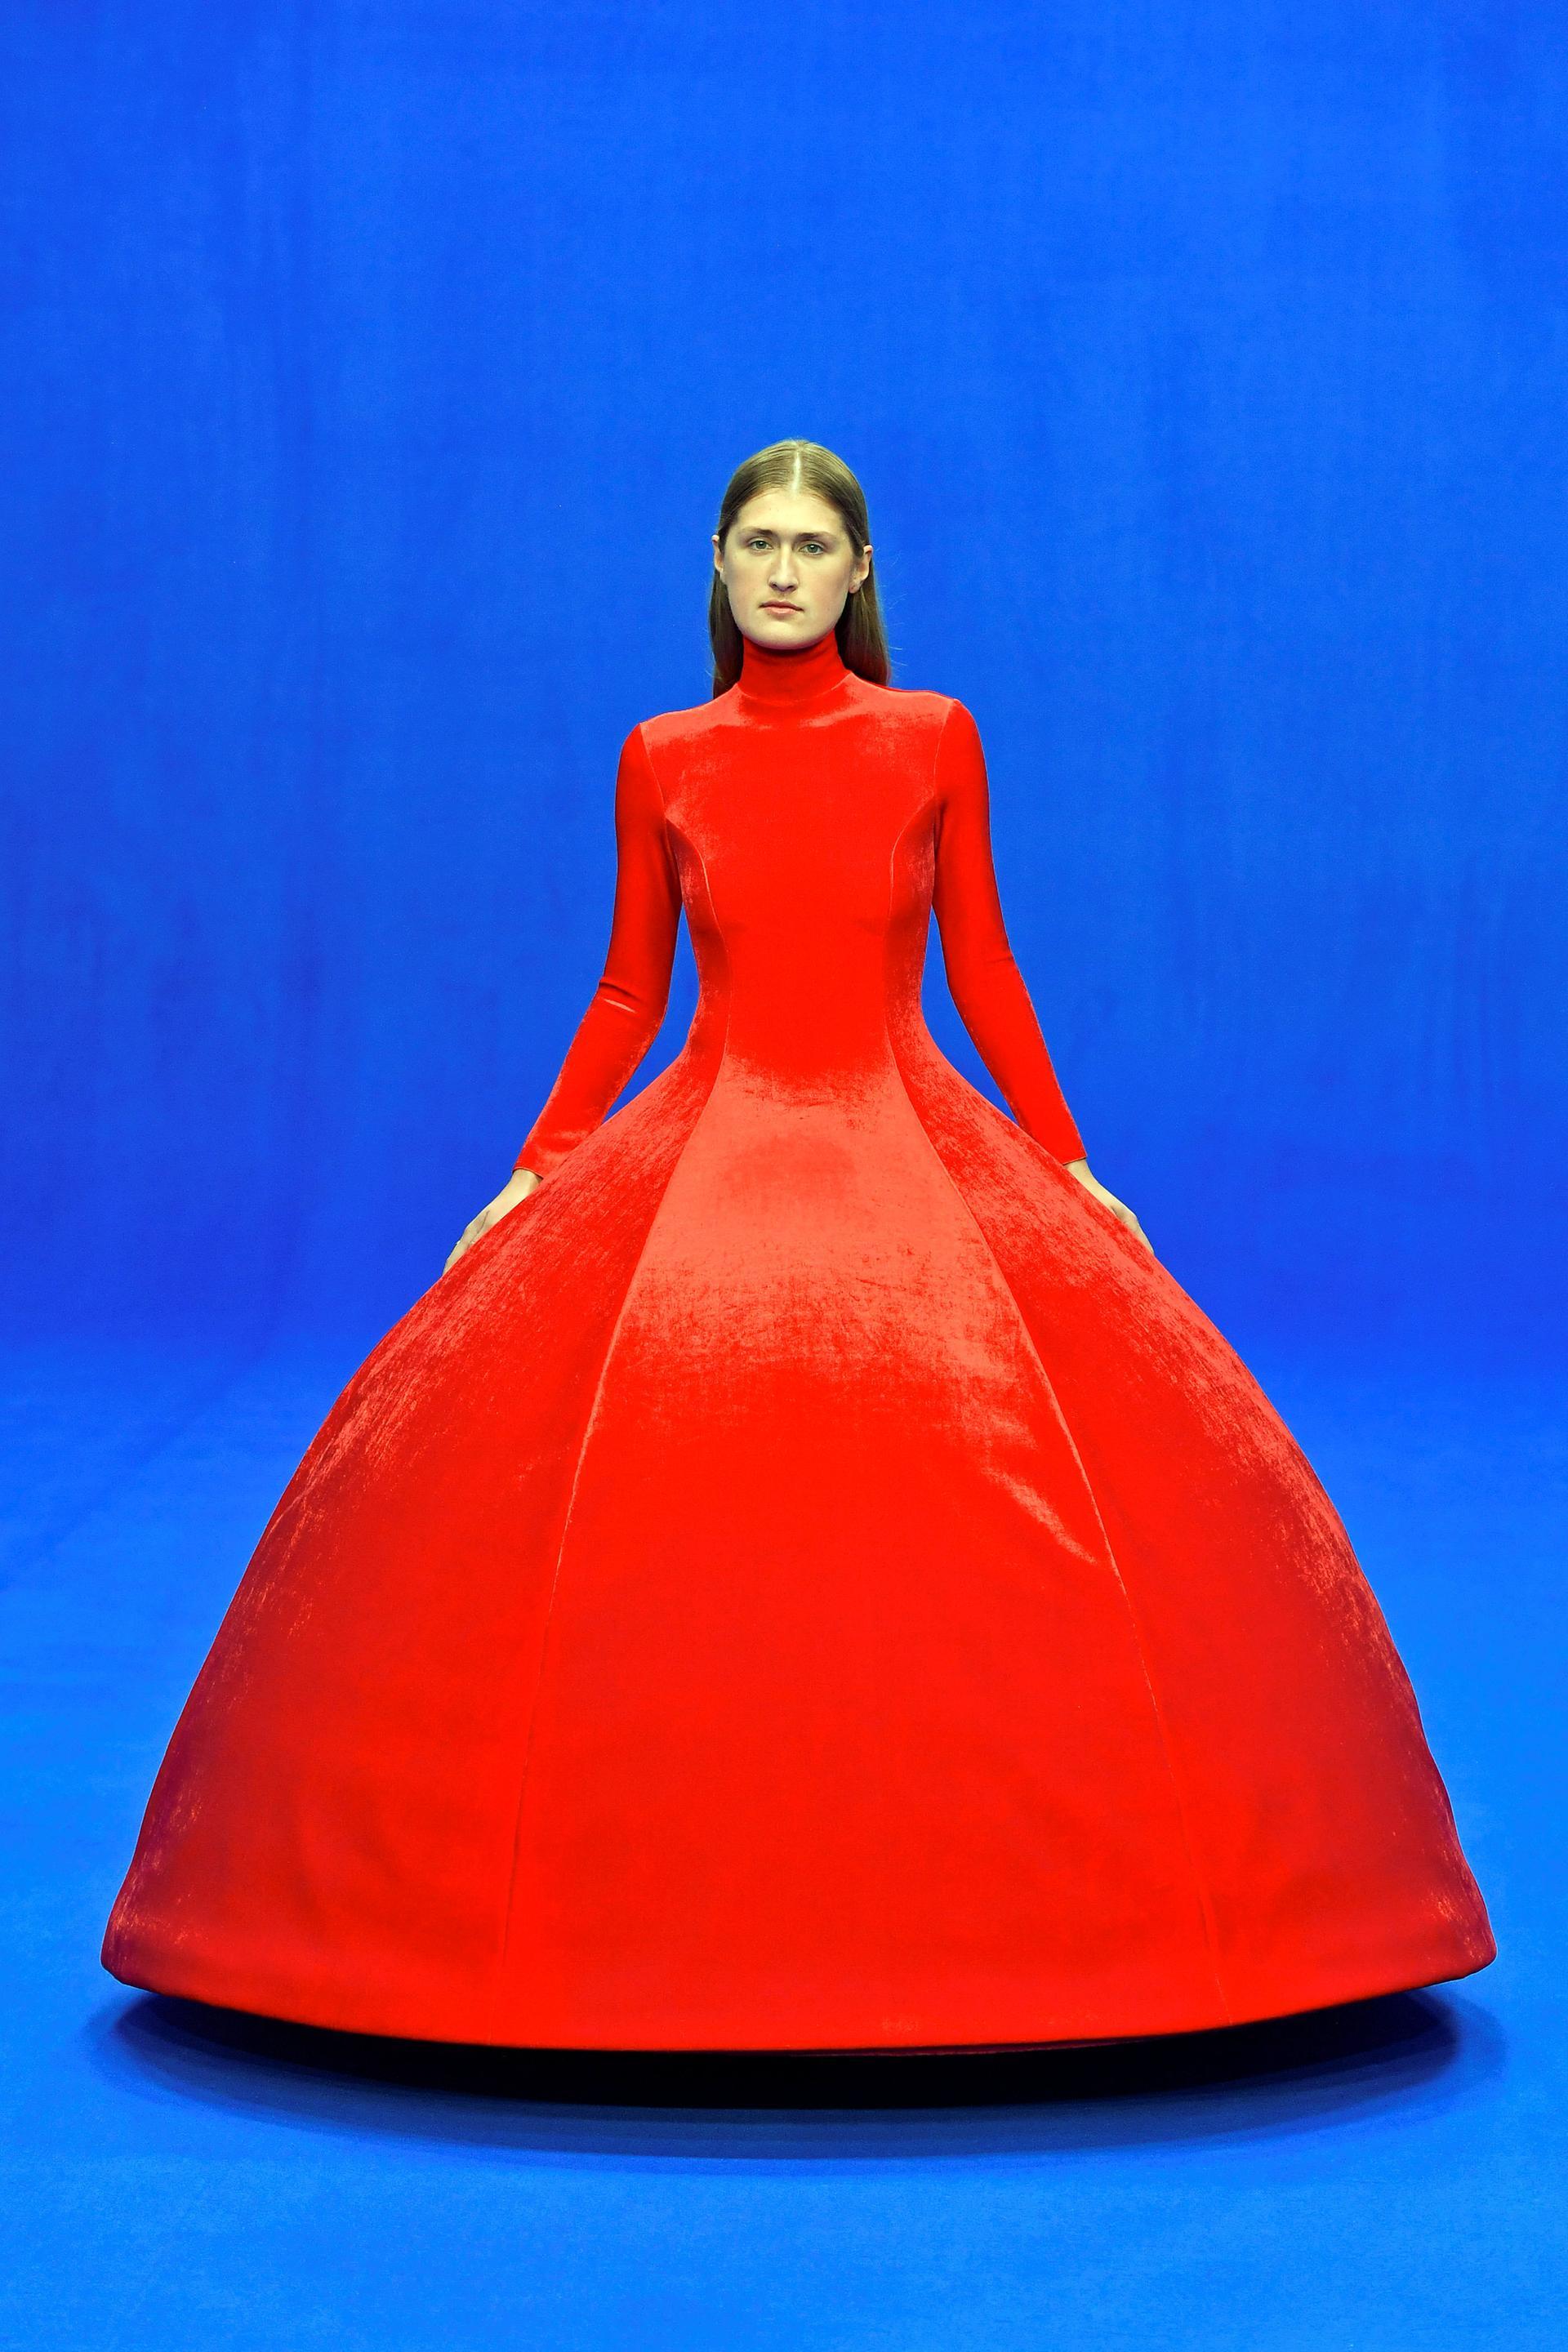 For its haute couture comeback, Balenciaga shook things up with